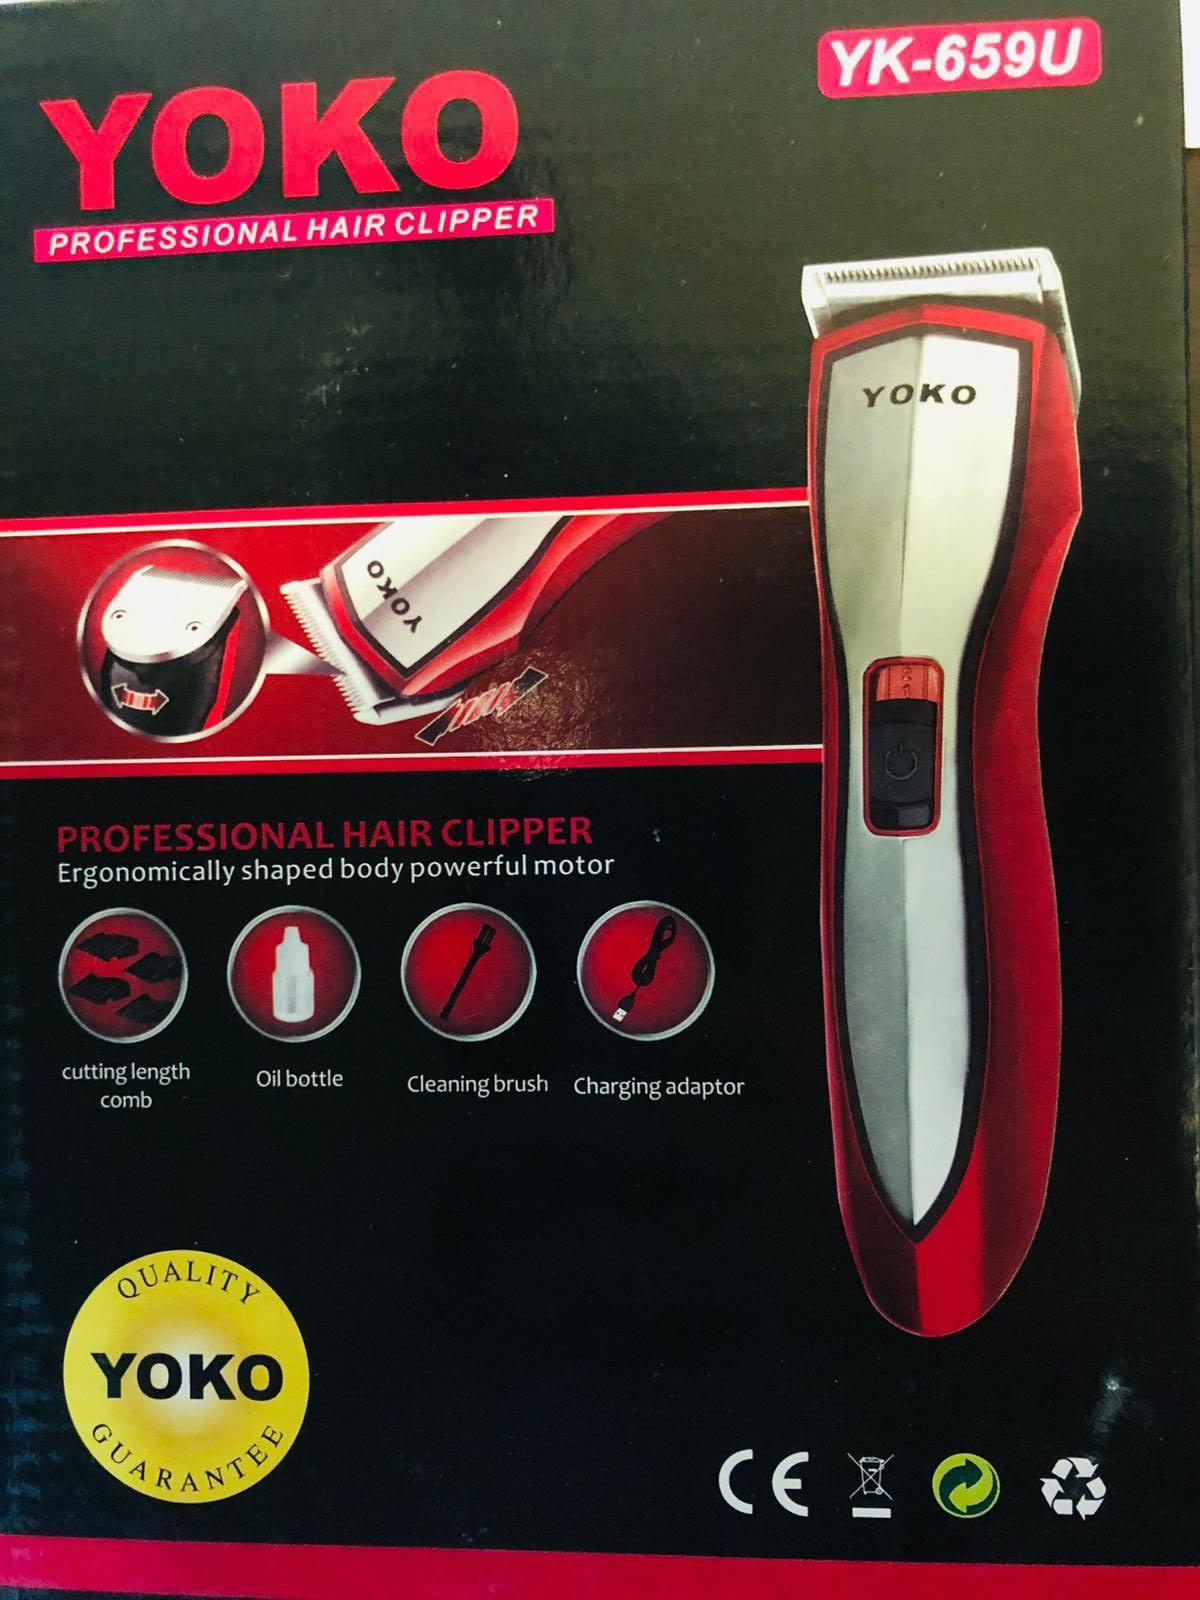 yoko rechargeable trimmer price